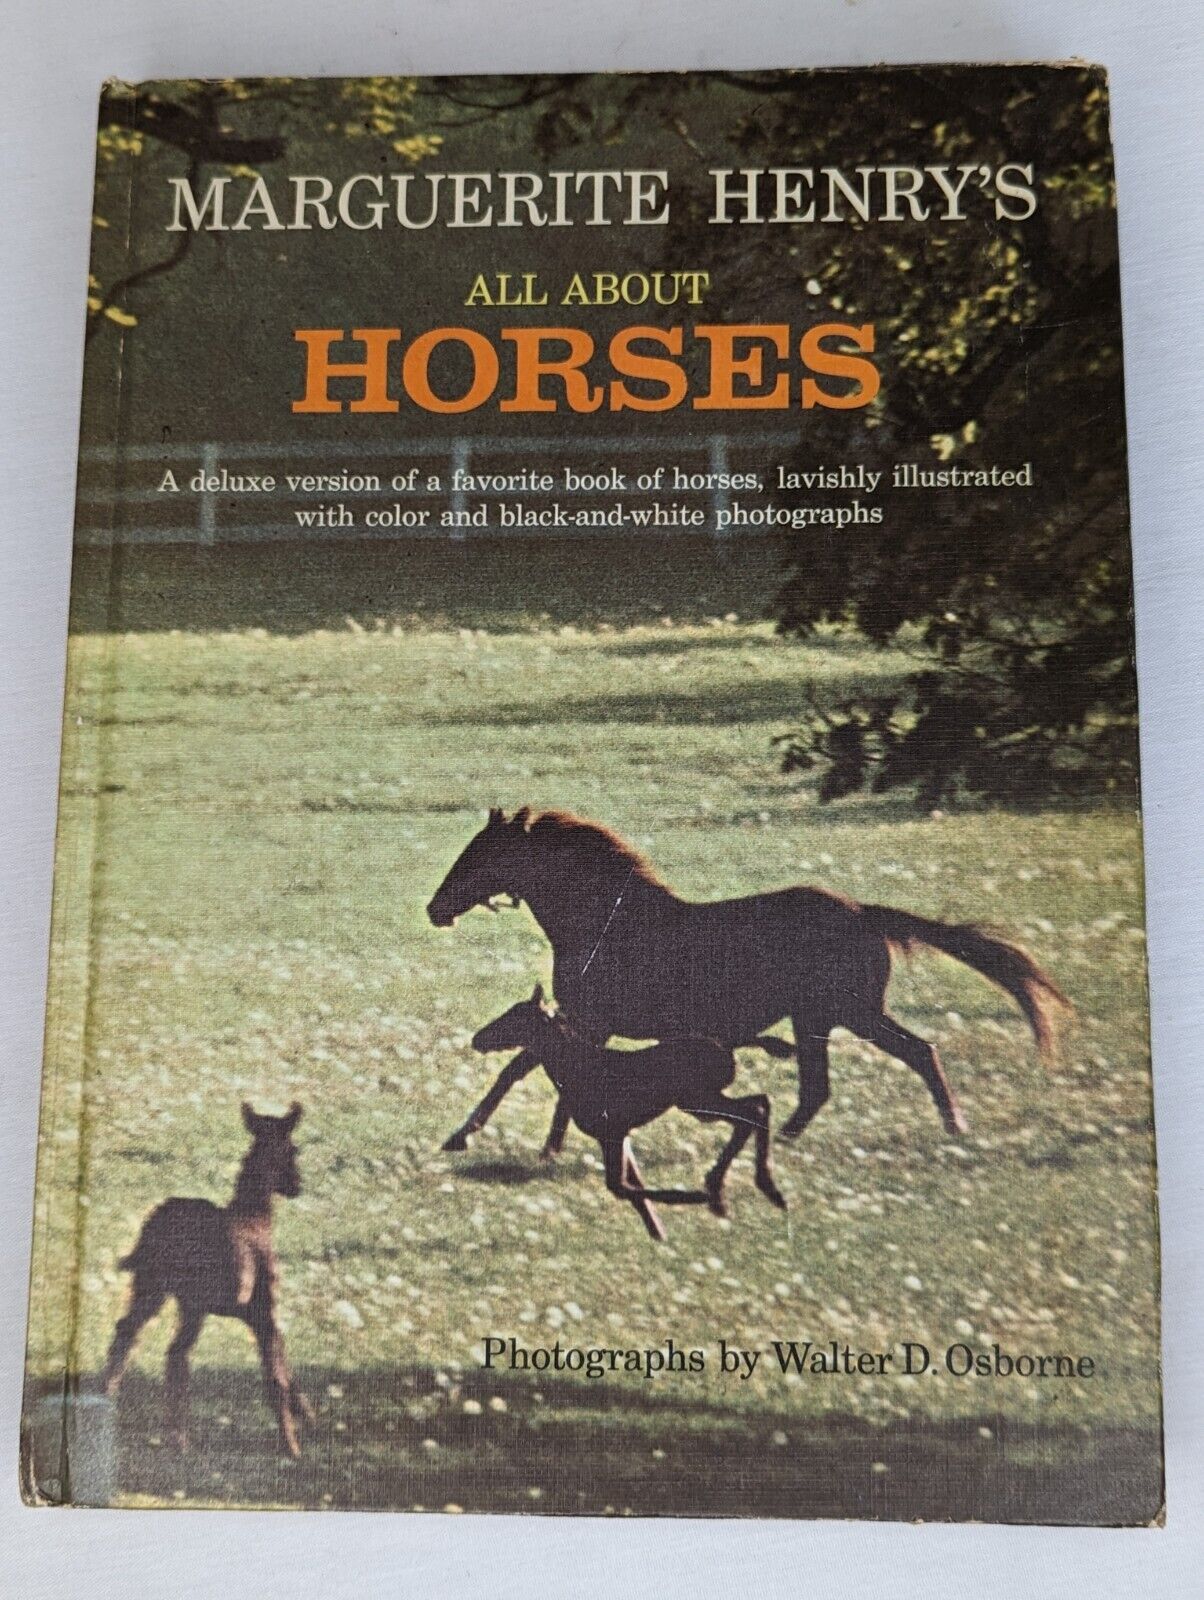 Marguerite Henry's ALL ABOUT HORSES Collectible Book Vintage 1967